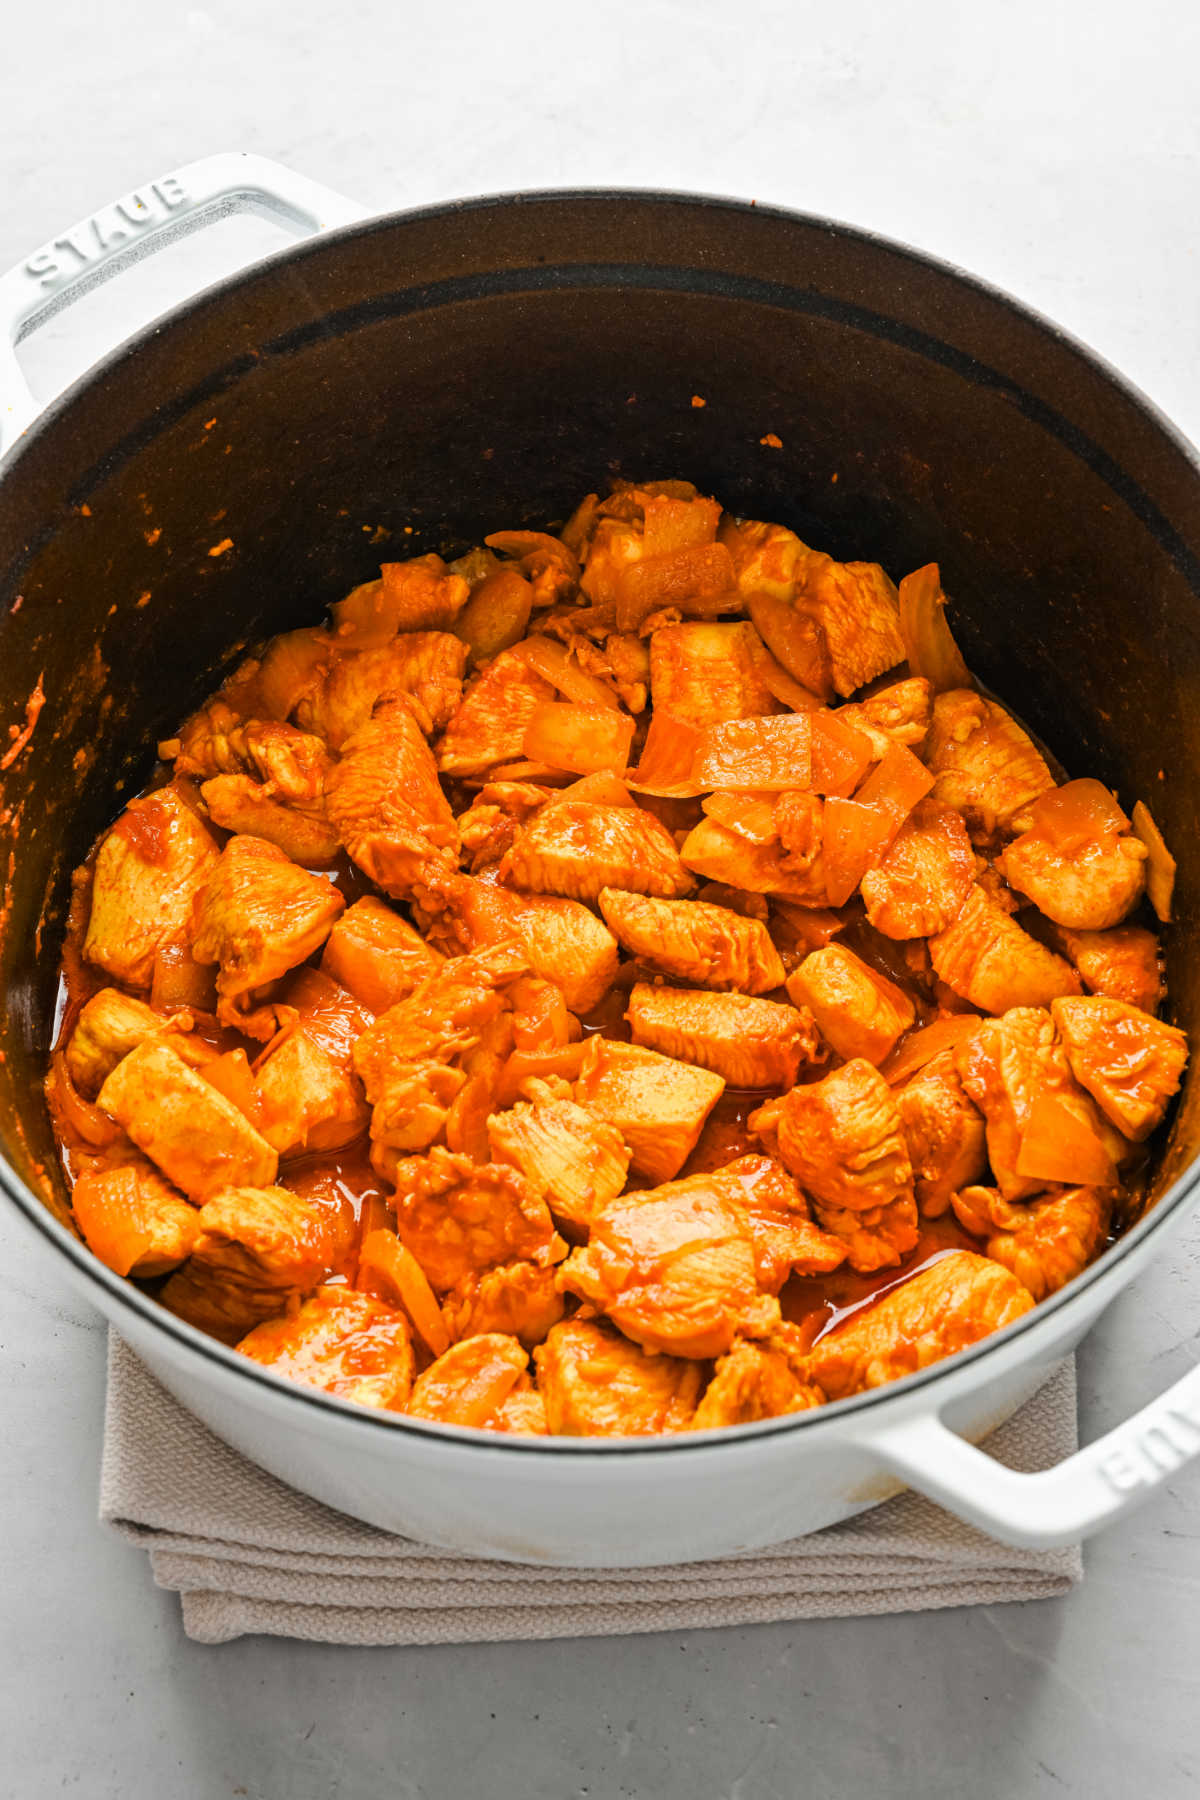 Chicken pieces sauteing with curry paste in a pot.